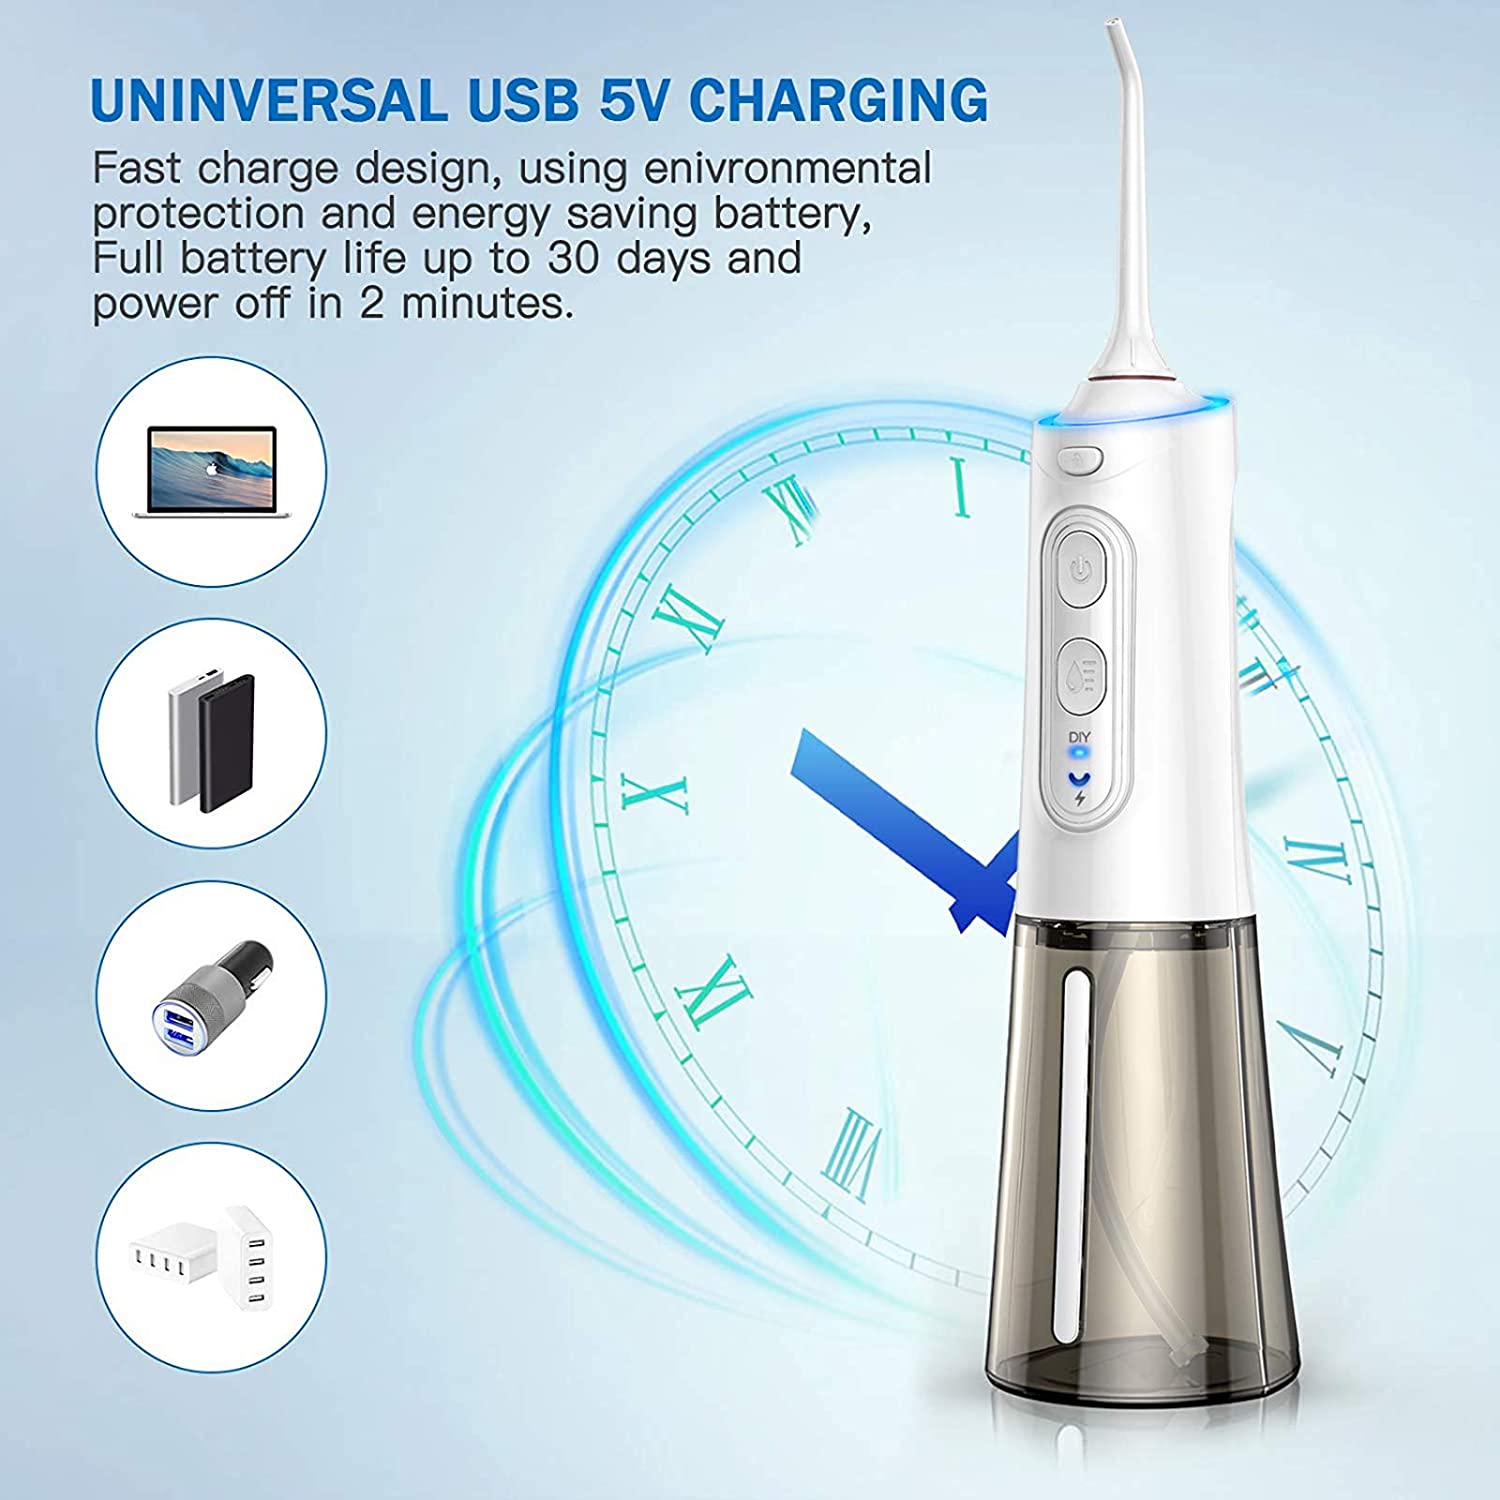 Cordless Advanced Water Flosser for Teeth, Gums, Braces, Dental Care | Rechargeable, Portable, Lage Capacity Battery | 4 Jet Tips & 360 Degree Rotation | Large Capacity Battery | Waterproof Dental Oral Irrigator